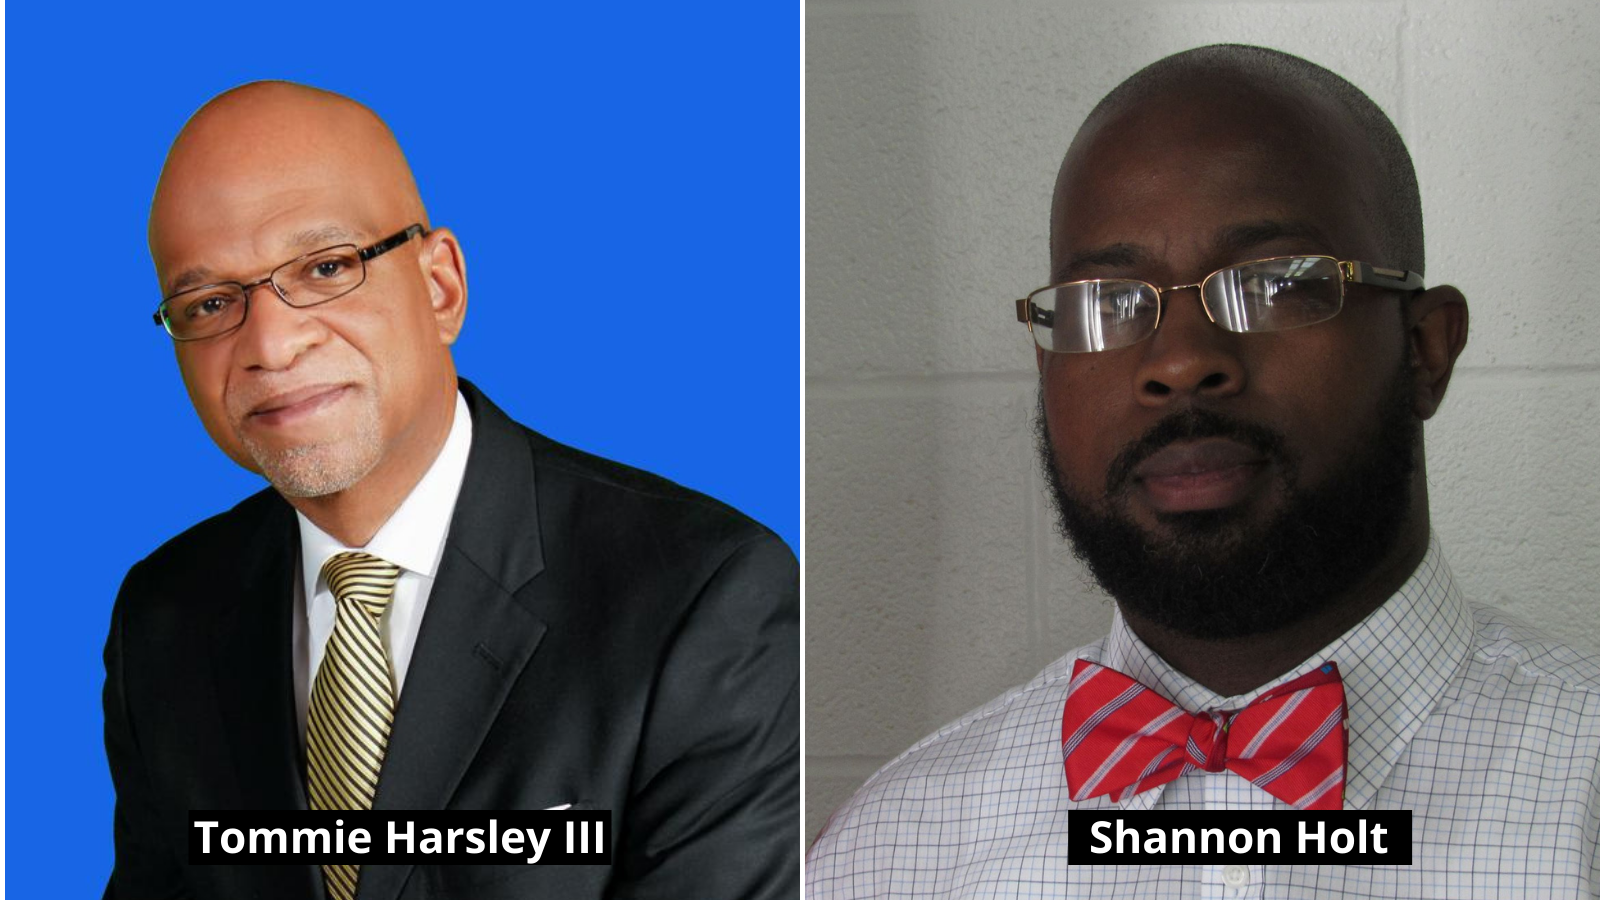 Tommie Harsley III and Shannon Holt